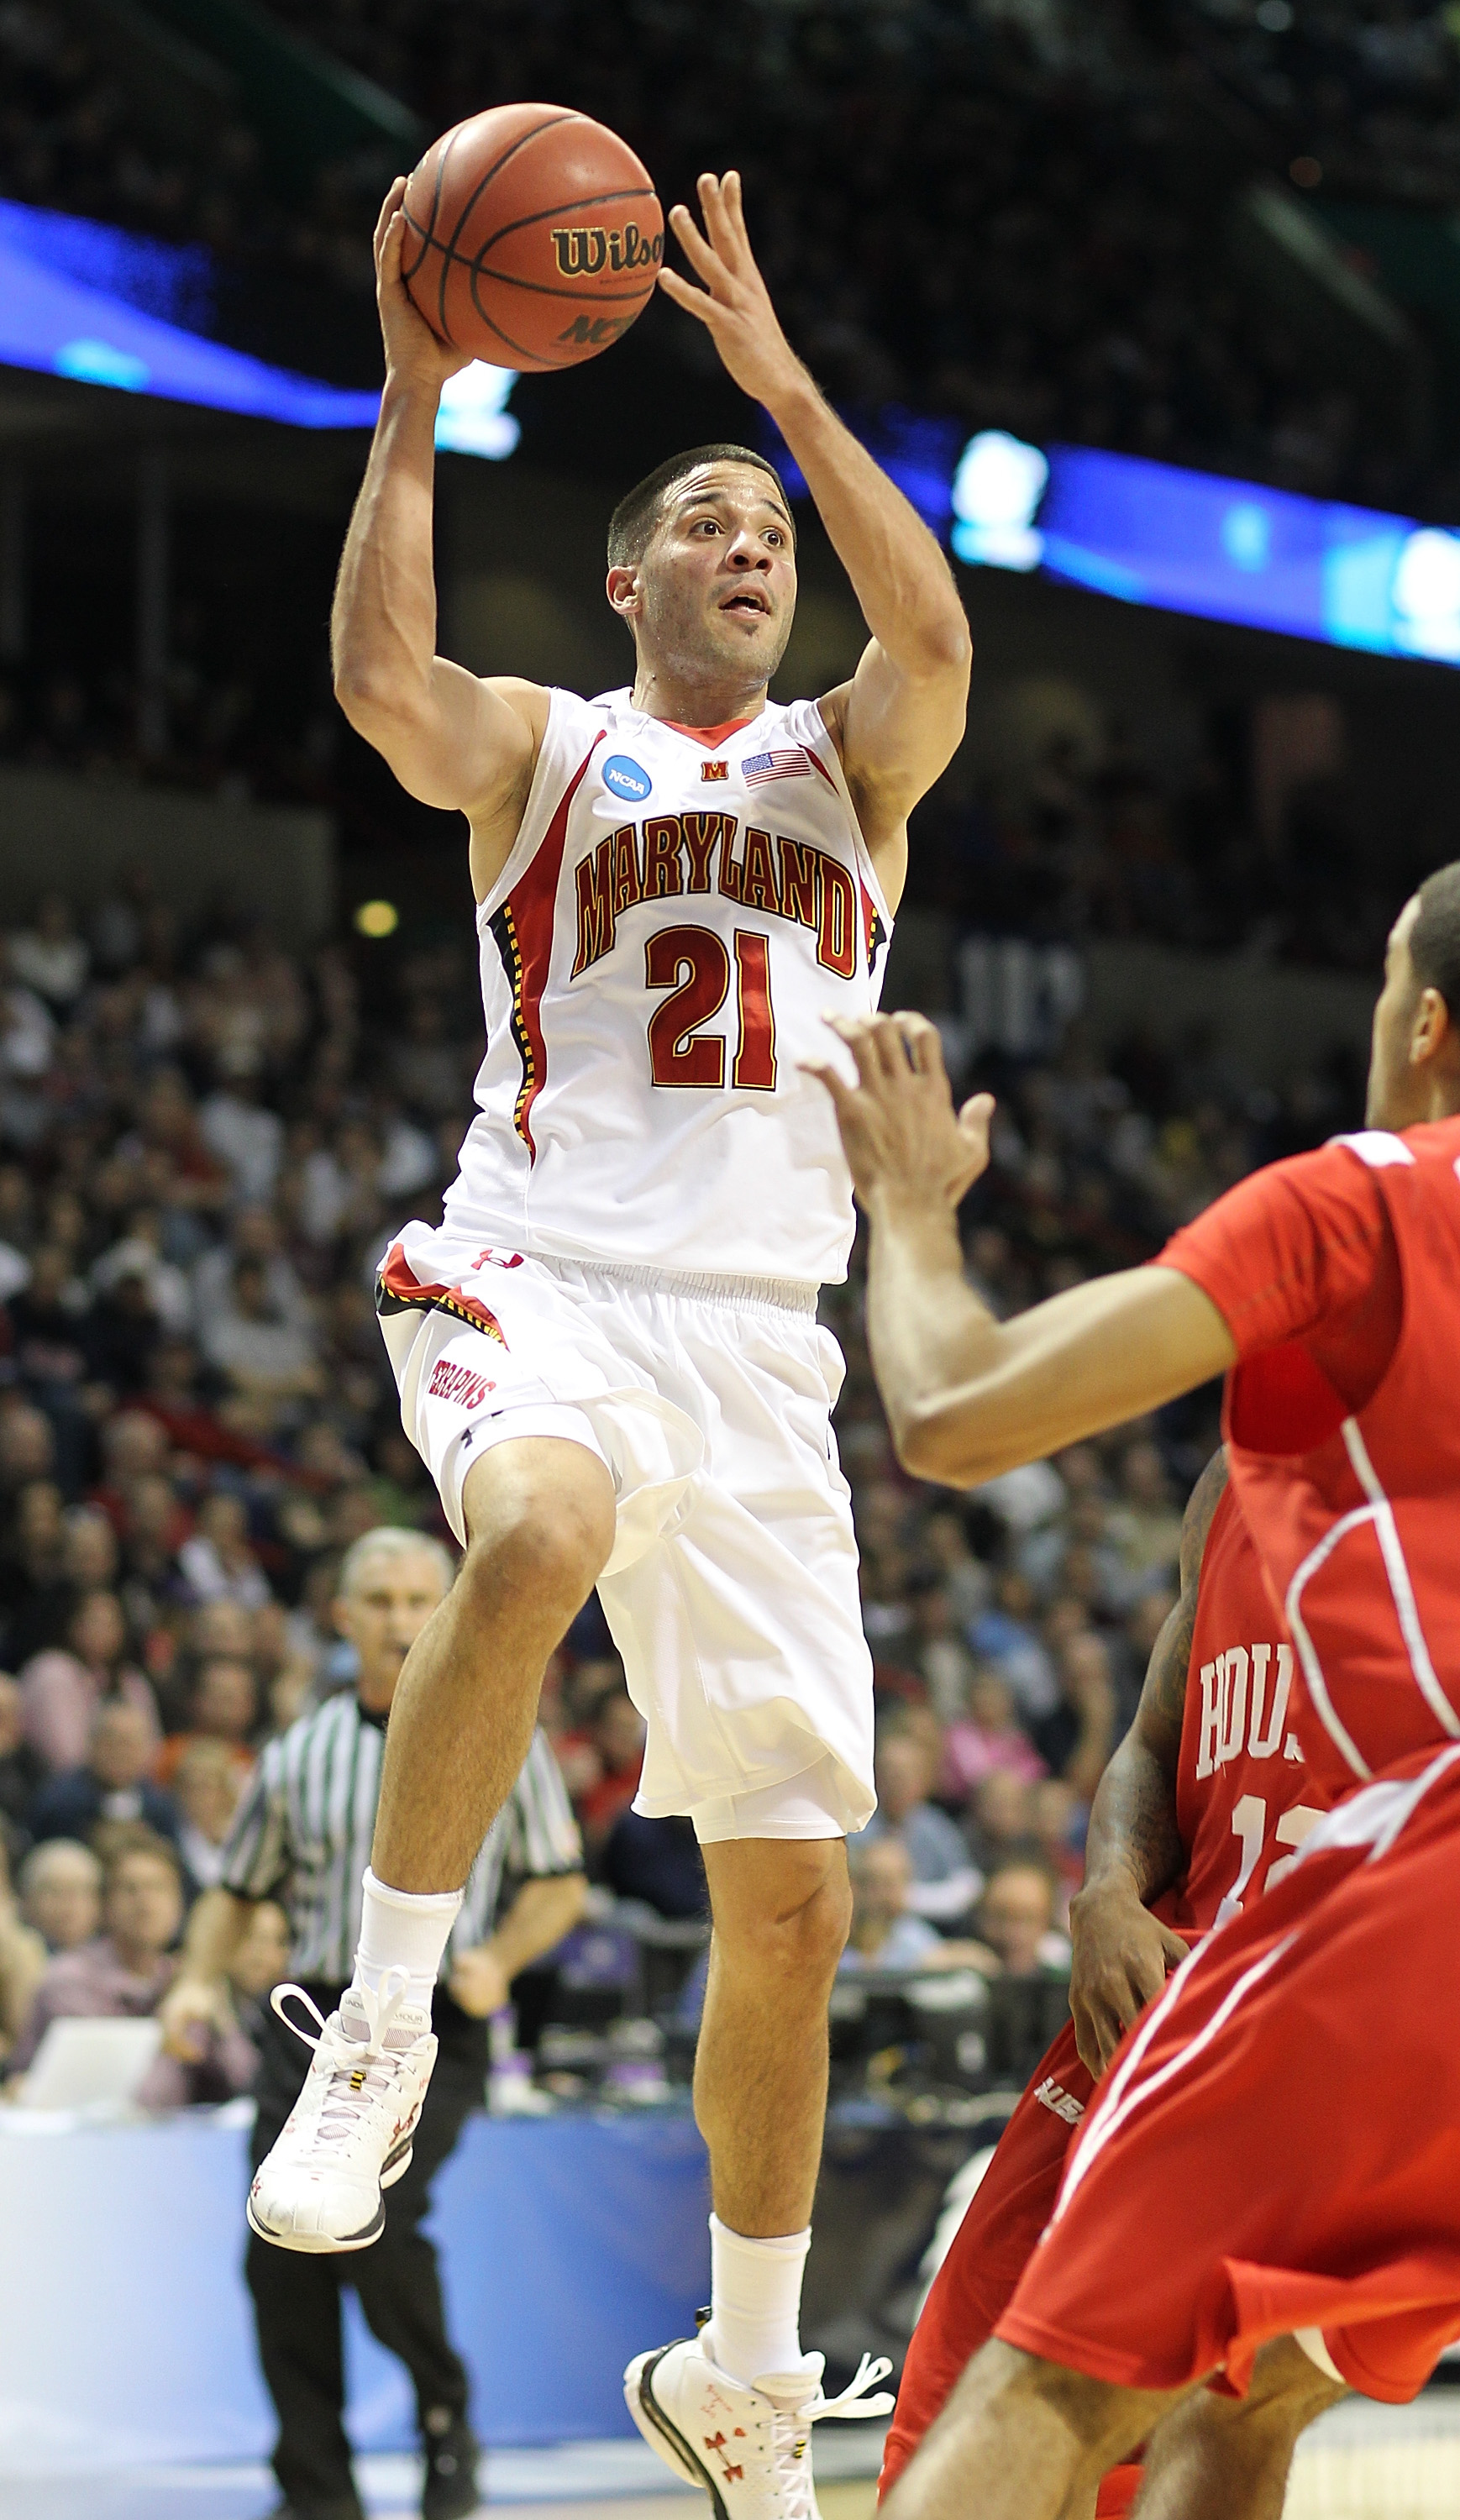 SPOKANE - MARCH 19:  Greivis Vasquez #21 of the Maryland Terrapins passes against the Houston Cougars during the first round of the 2010 NCAA men's basketball tournament at the Spokane Arena on March 19, 2010 in Spokane, Washington. (Photo by Otto Greule